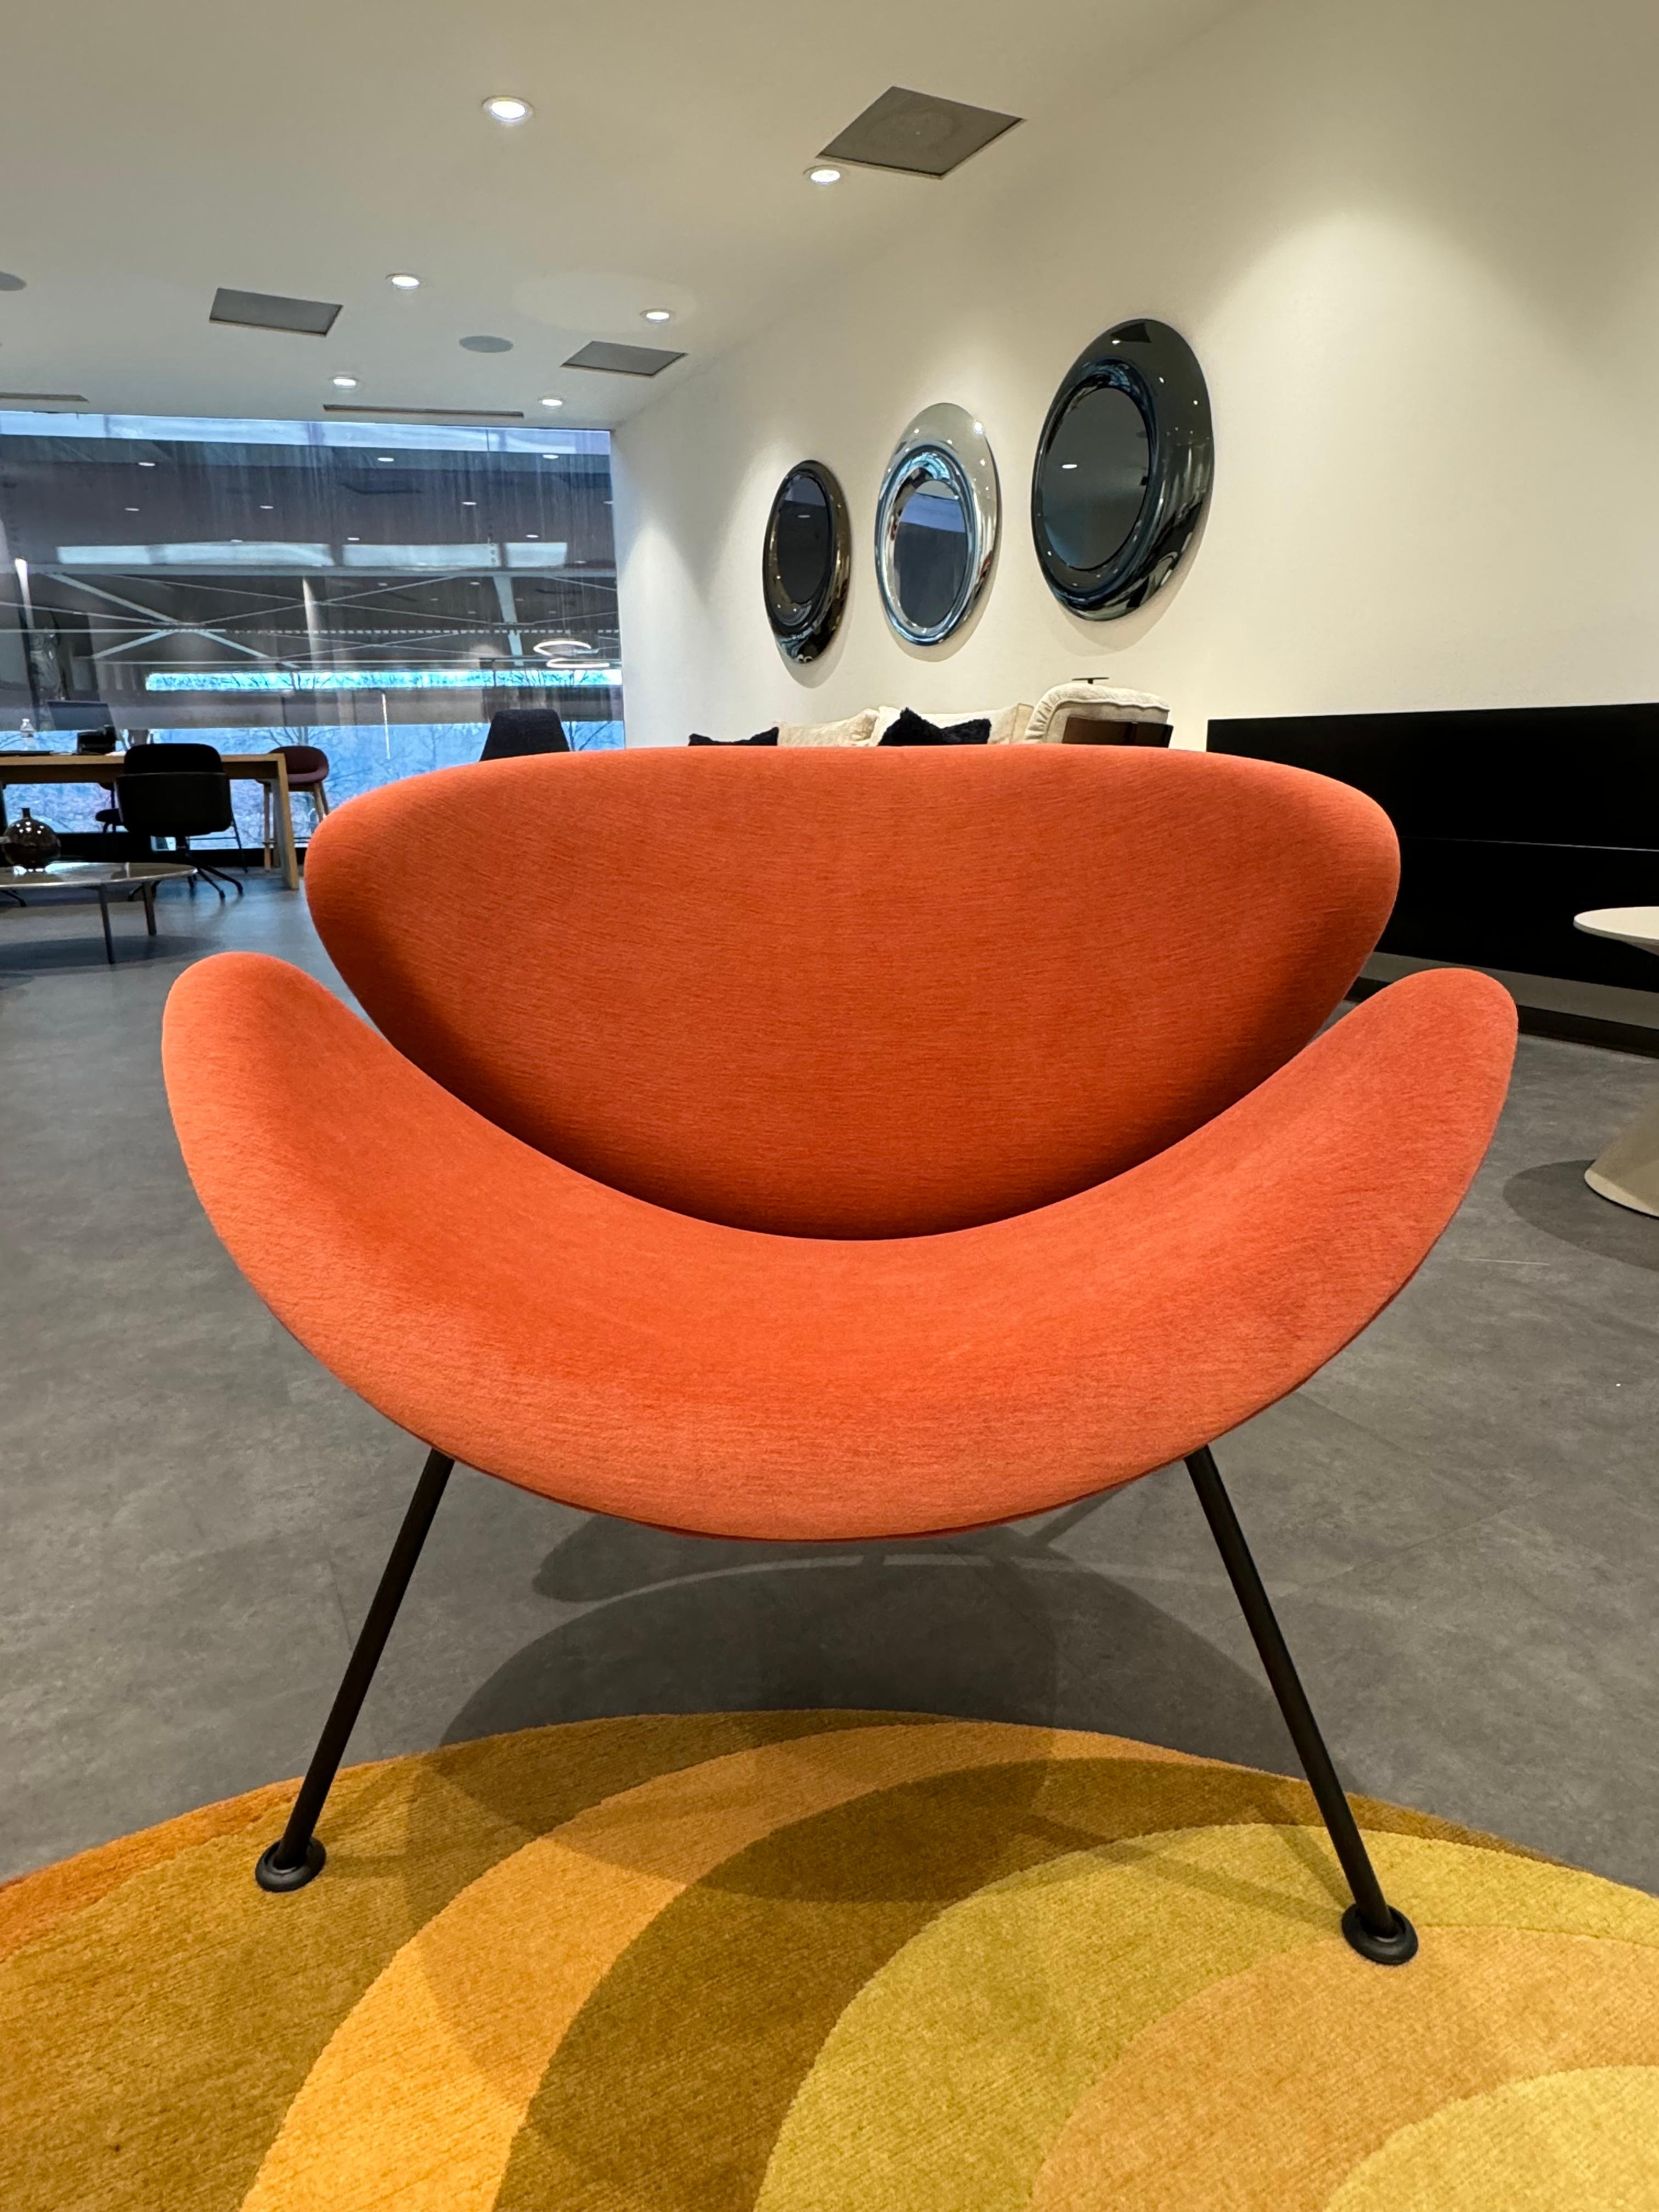 Model F 437 low
Base Powder coat
Fire-retardant foam No
Upholstery Gentle (GG) 0573
Colour of base P10 / Black RAL 9005
(structure)
The orange slice armchair by designer Pierre Paulin is one of the most popular design armchairs in the world. This